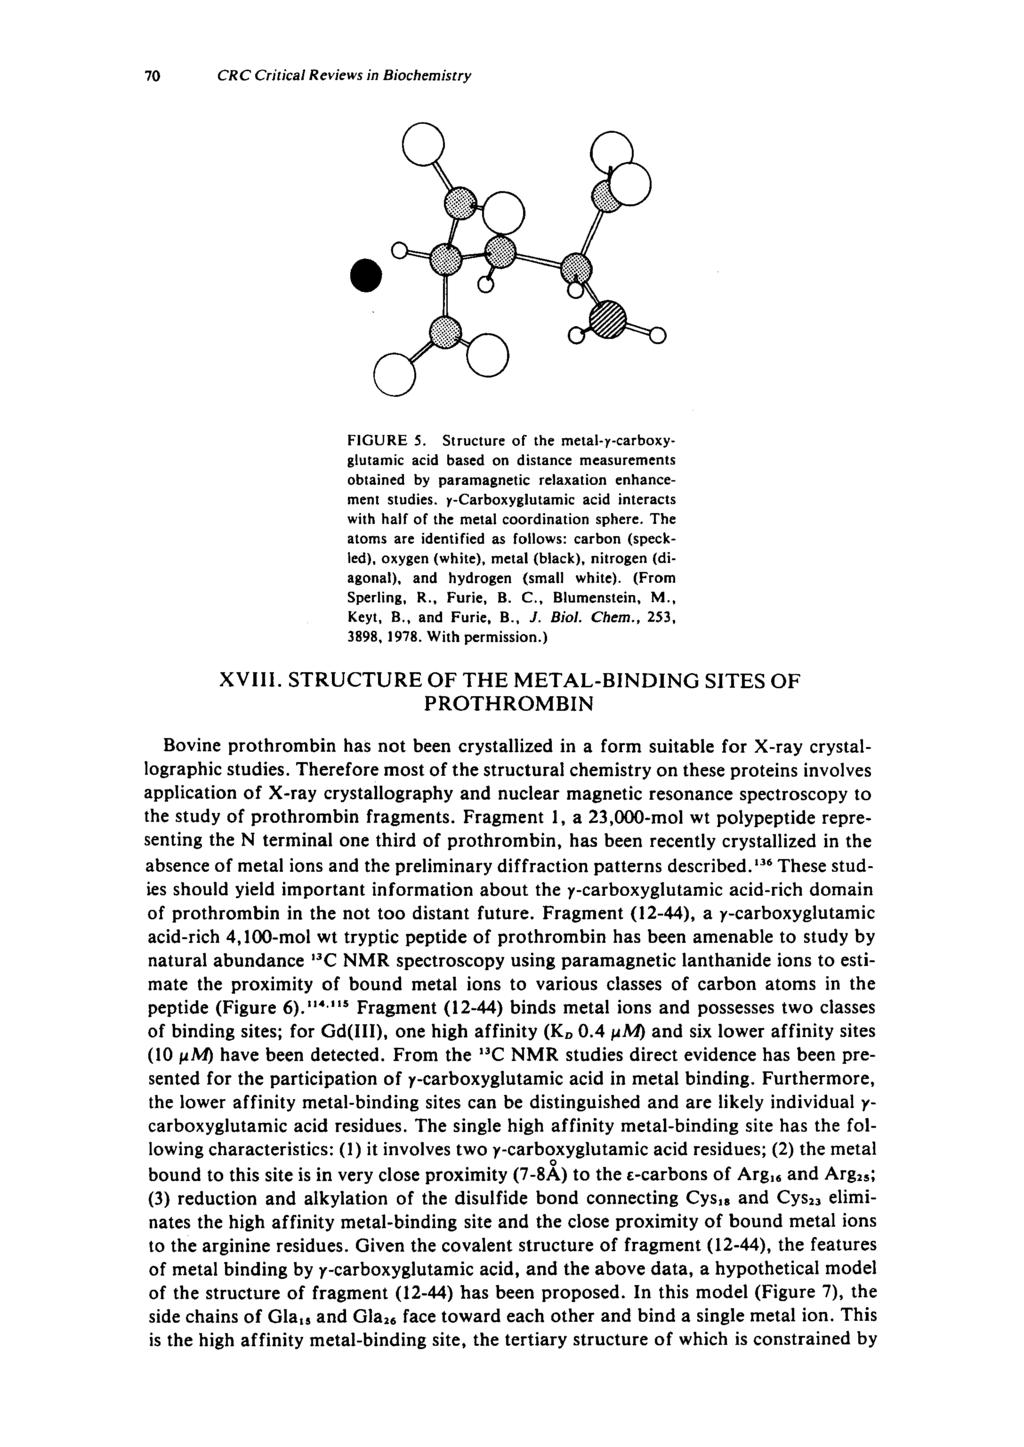 I0 CRC Critical Reviews in Biochemistry FIGURE 5. Structure of the metal-y-carboxyglutamic acid based on distance measurements obtained by paramagnetic relaxation enhancement studies.